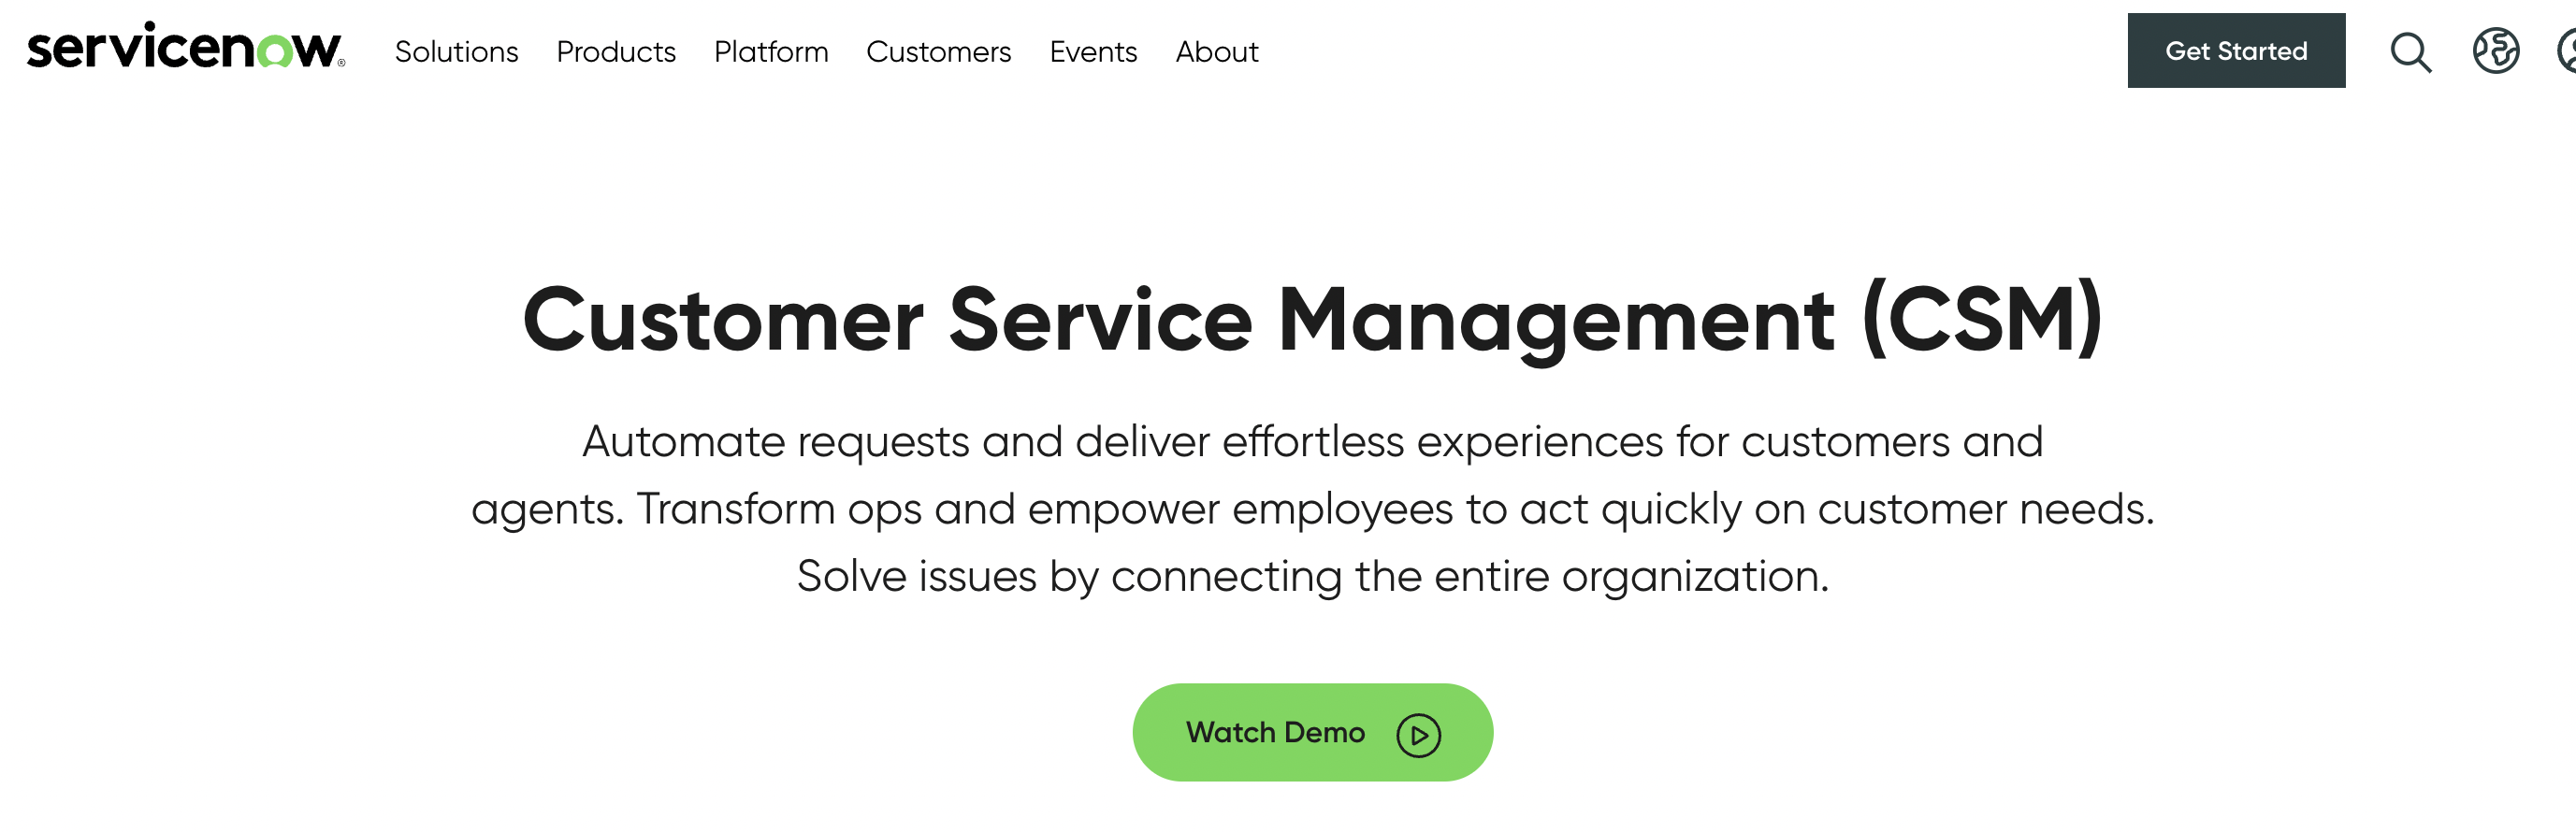 Help desk automation tools: ServiceNow Customer Service Management